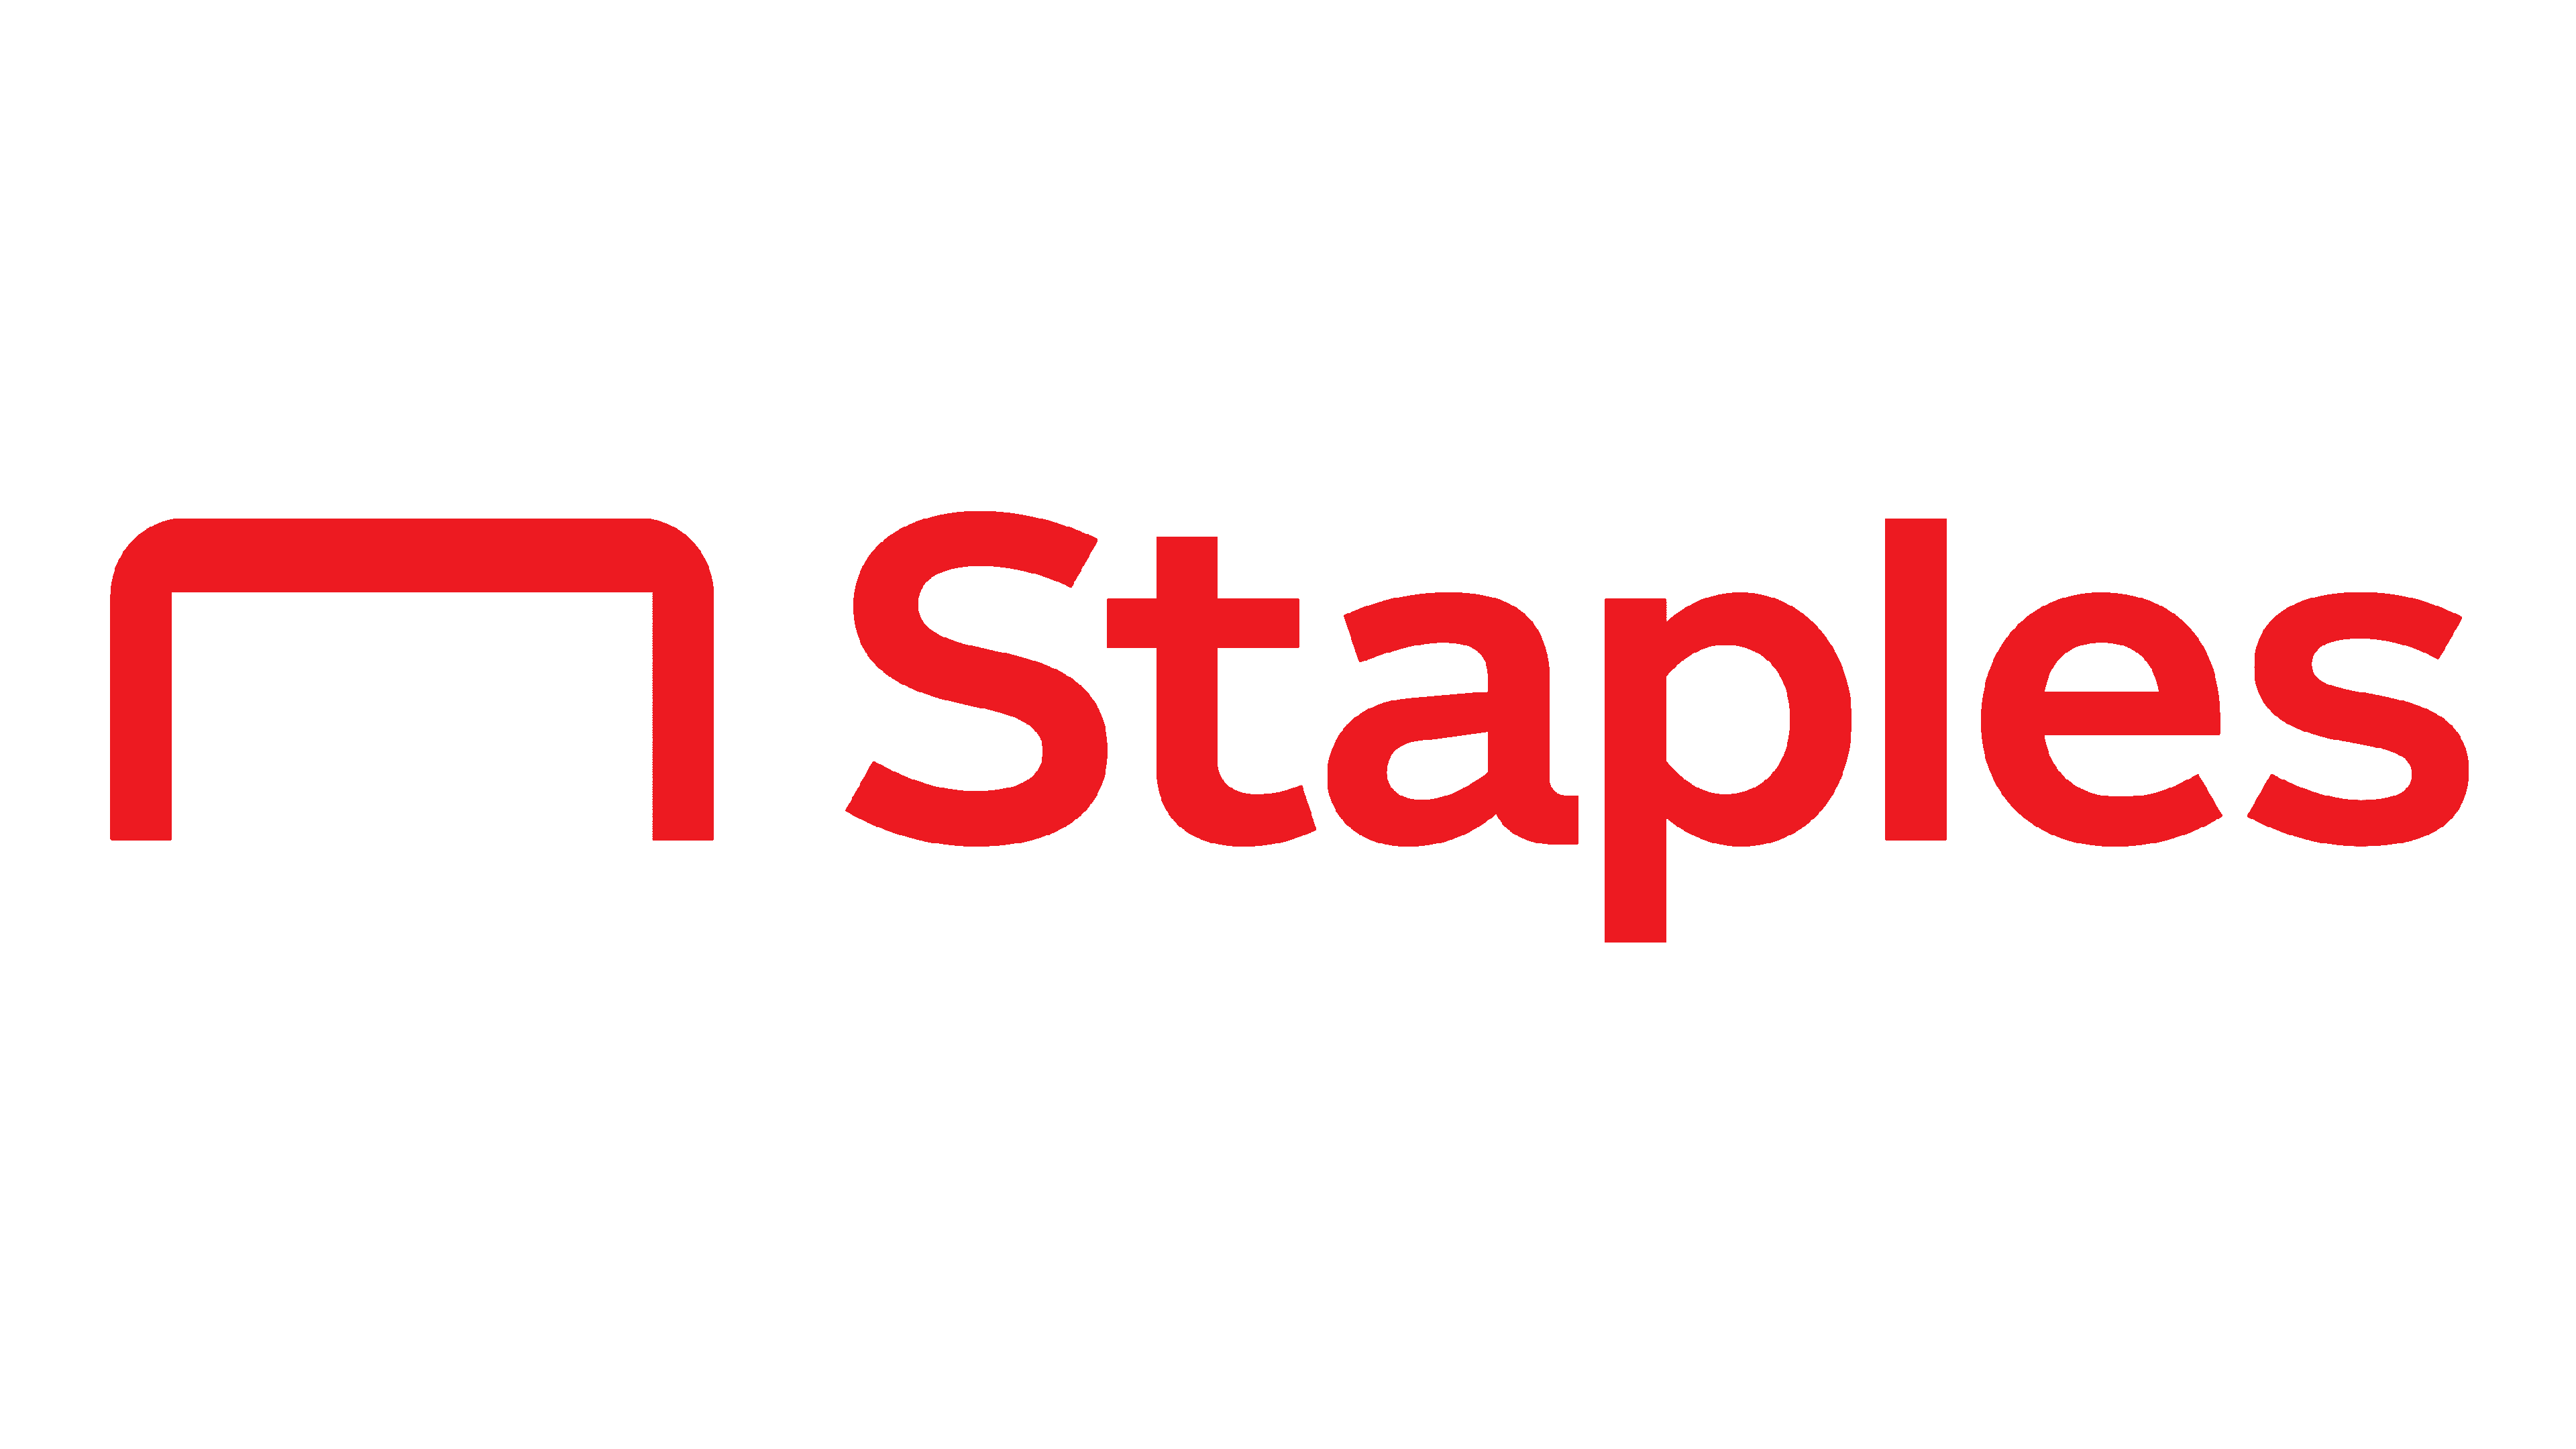 At Staples - No Purchase Fee when you buy a $200 Mastercard Gift Card In Store Only (a $7.95 value) - Starts from 3/24-3/30- Limit 8 per customer per day